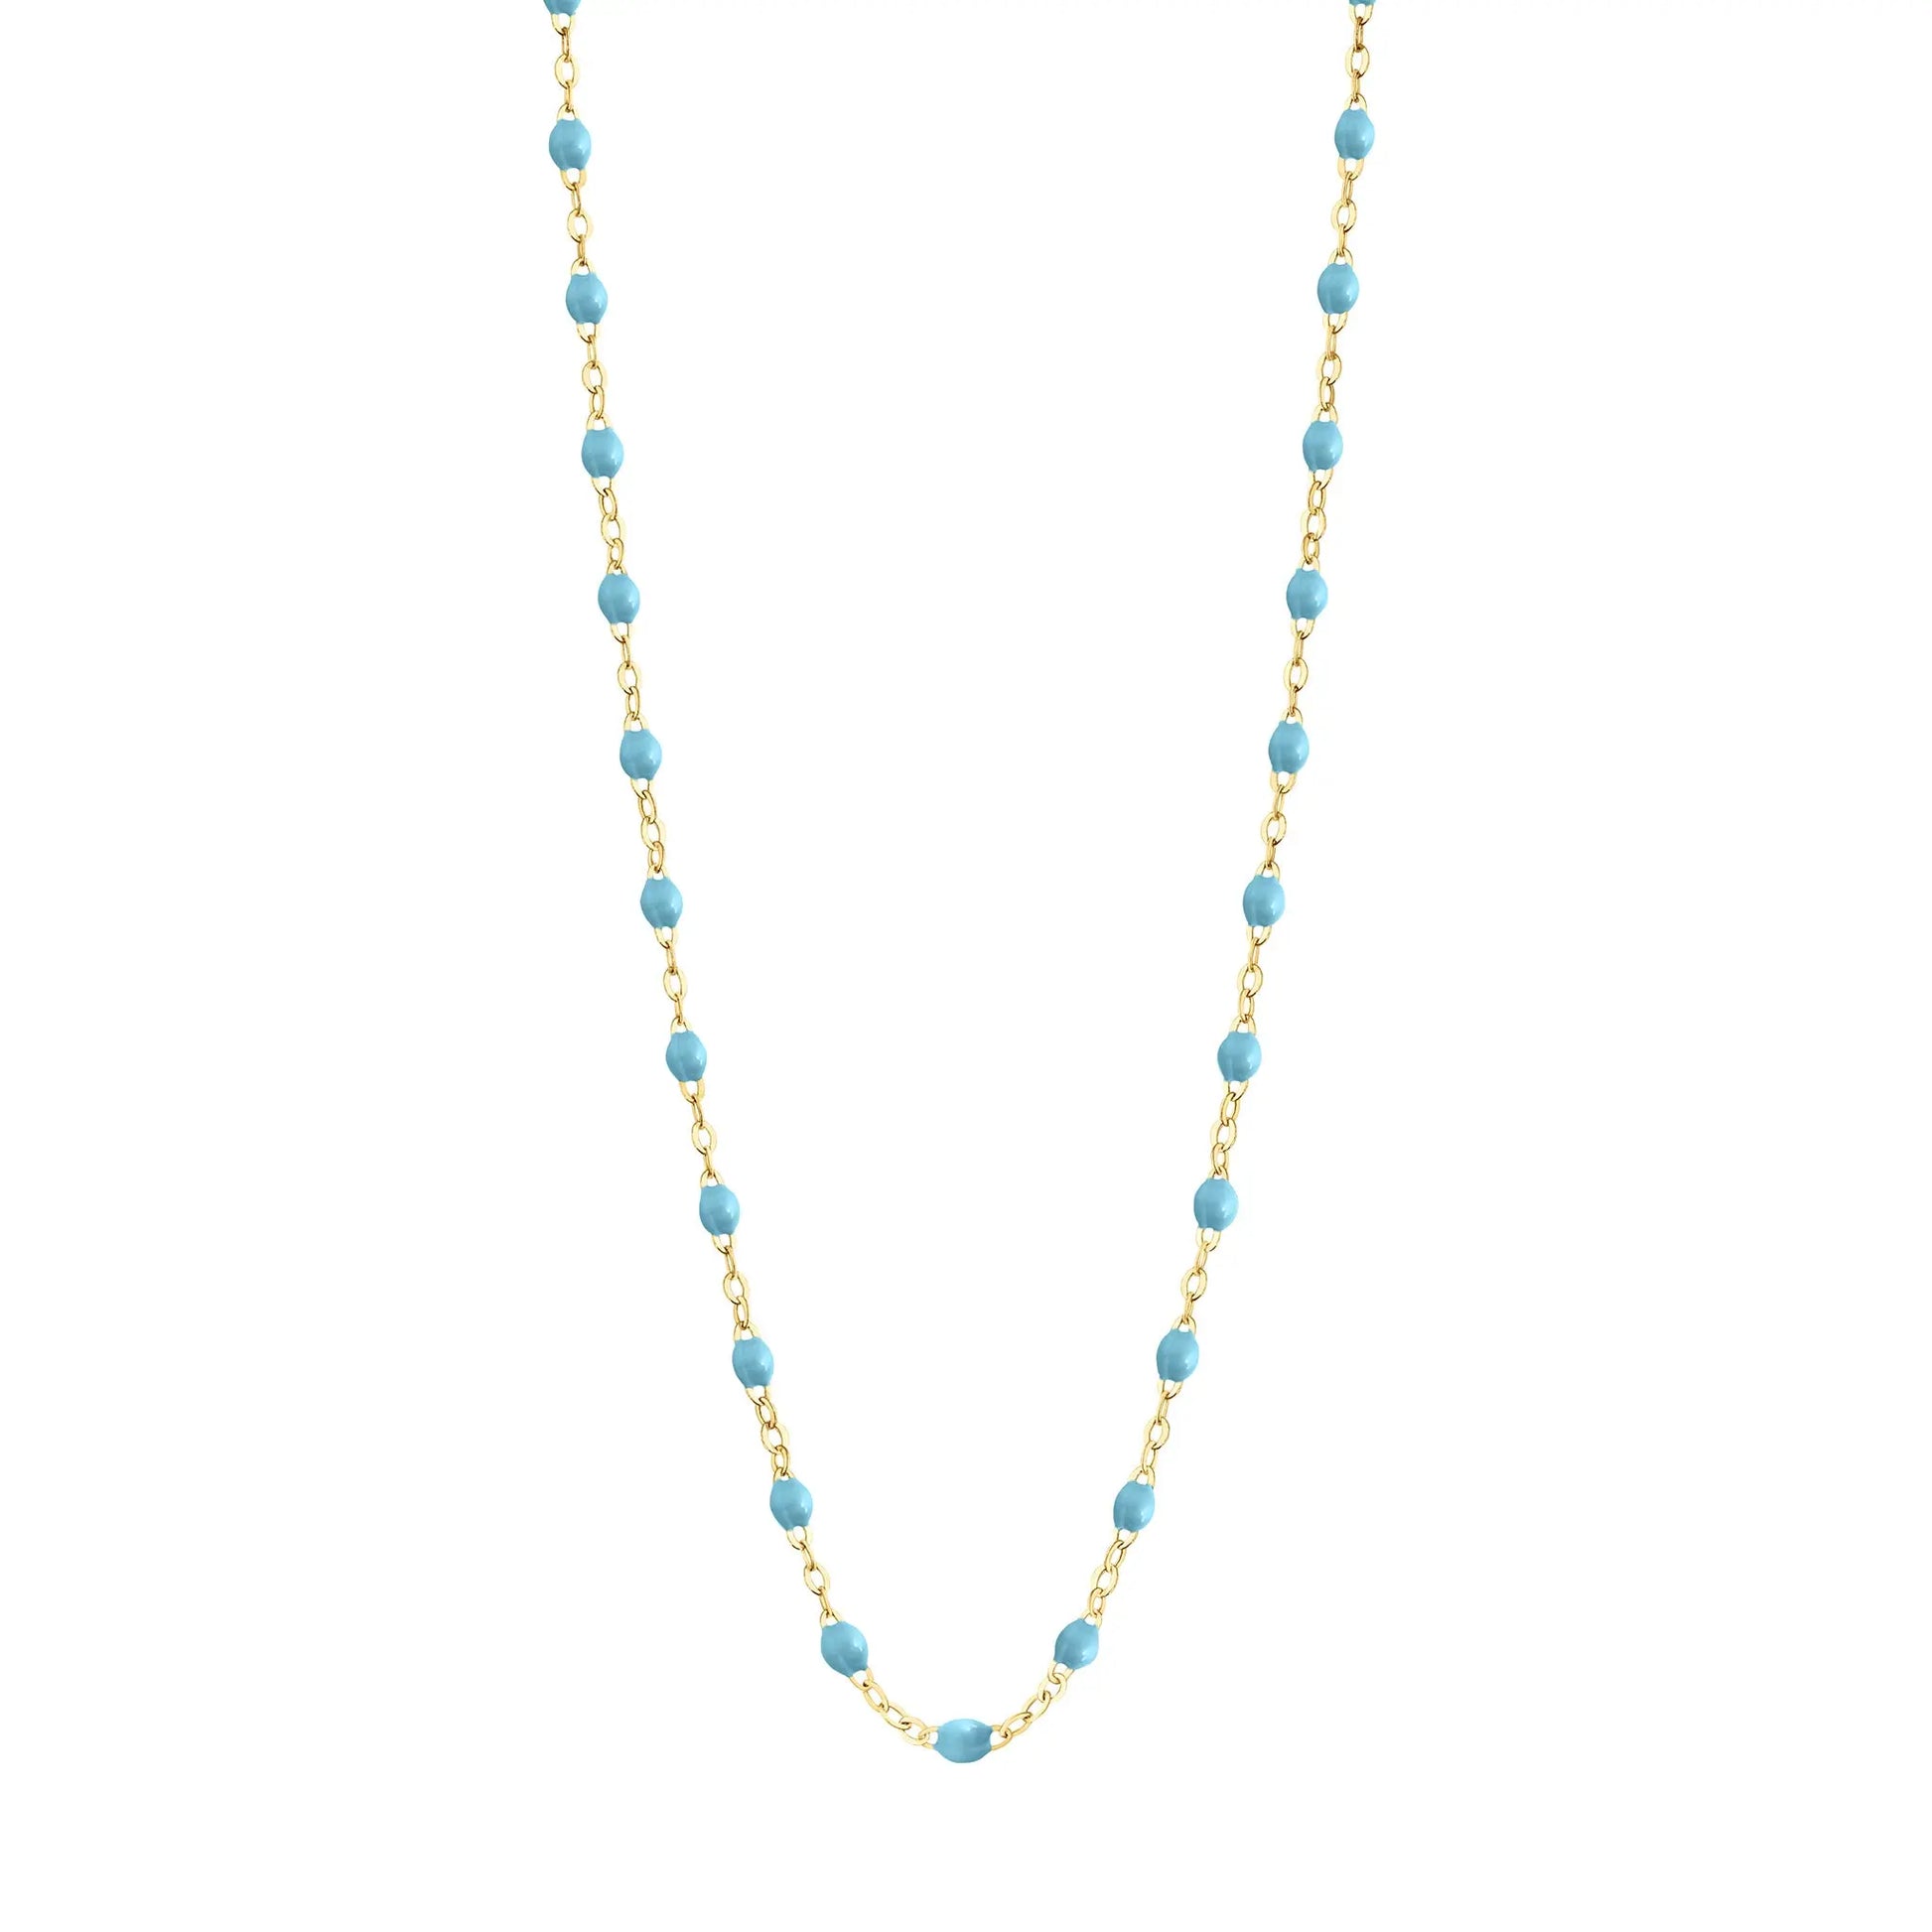 Stack you necklace layers with this versatile beaded chain! The Classic Gigi Necklace by gigi CLOZEAU features 18 carat yellow gold, and striking Turquoise resin jewels for an everyday effortless appearance. Handcrafted in 18k yellow gold. The beads measure 1.50mm in diameter and is finished with a spring ring clasp. The length is 19.7 inches.